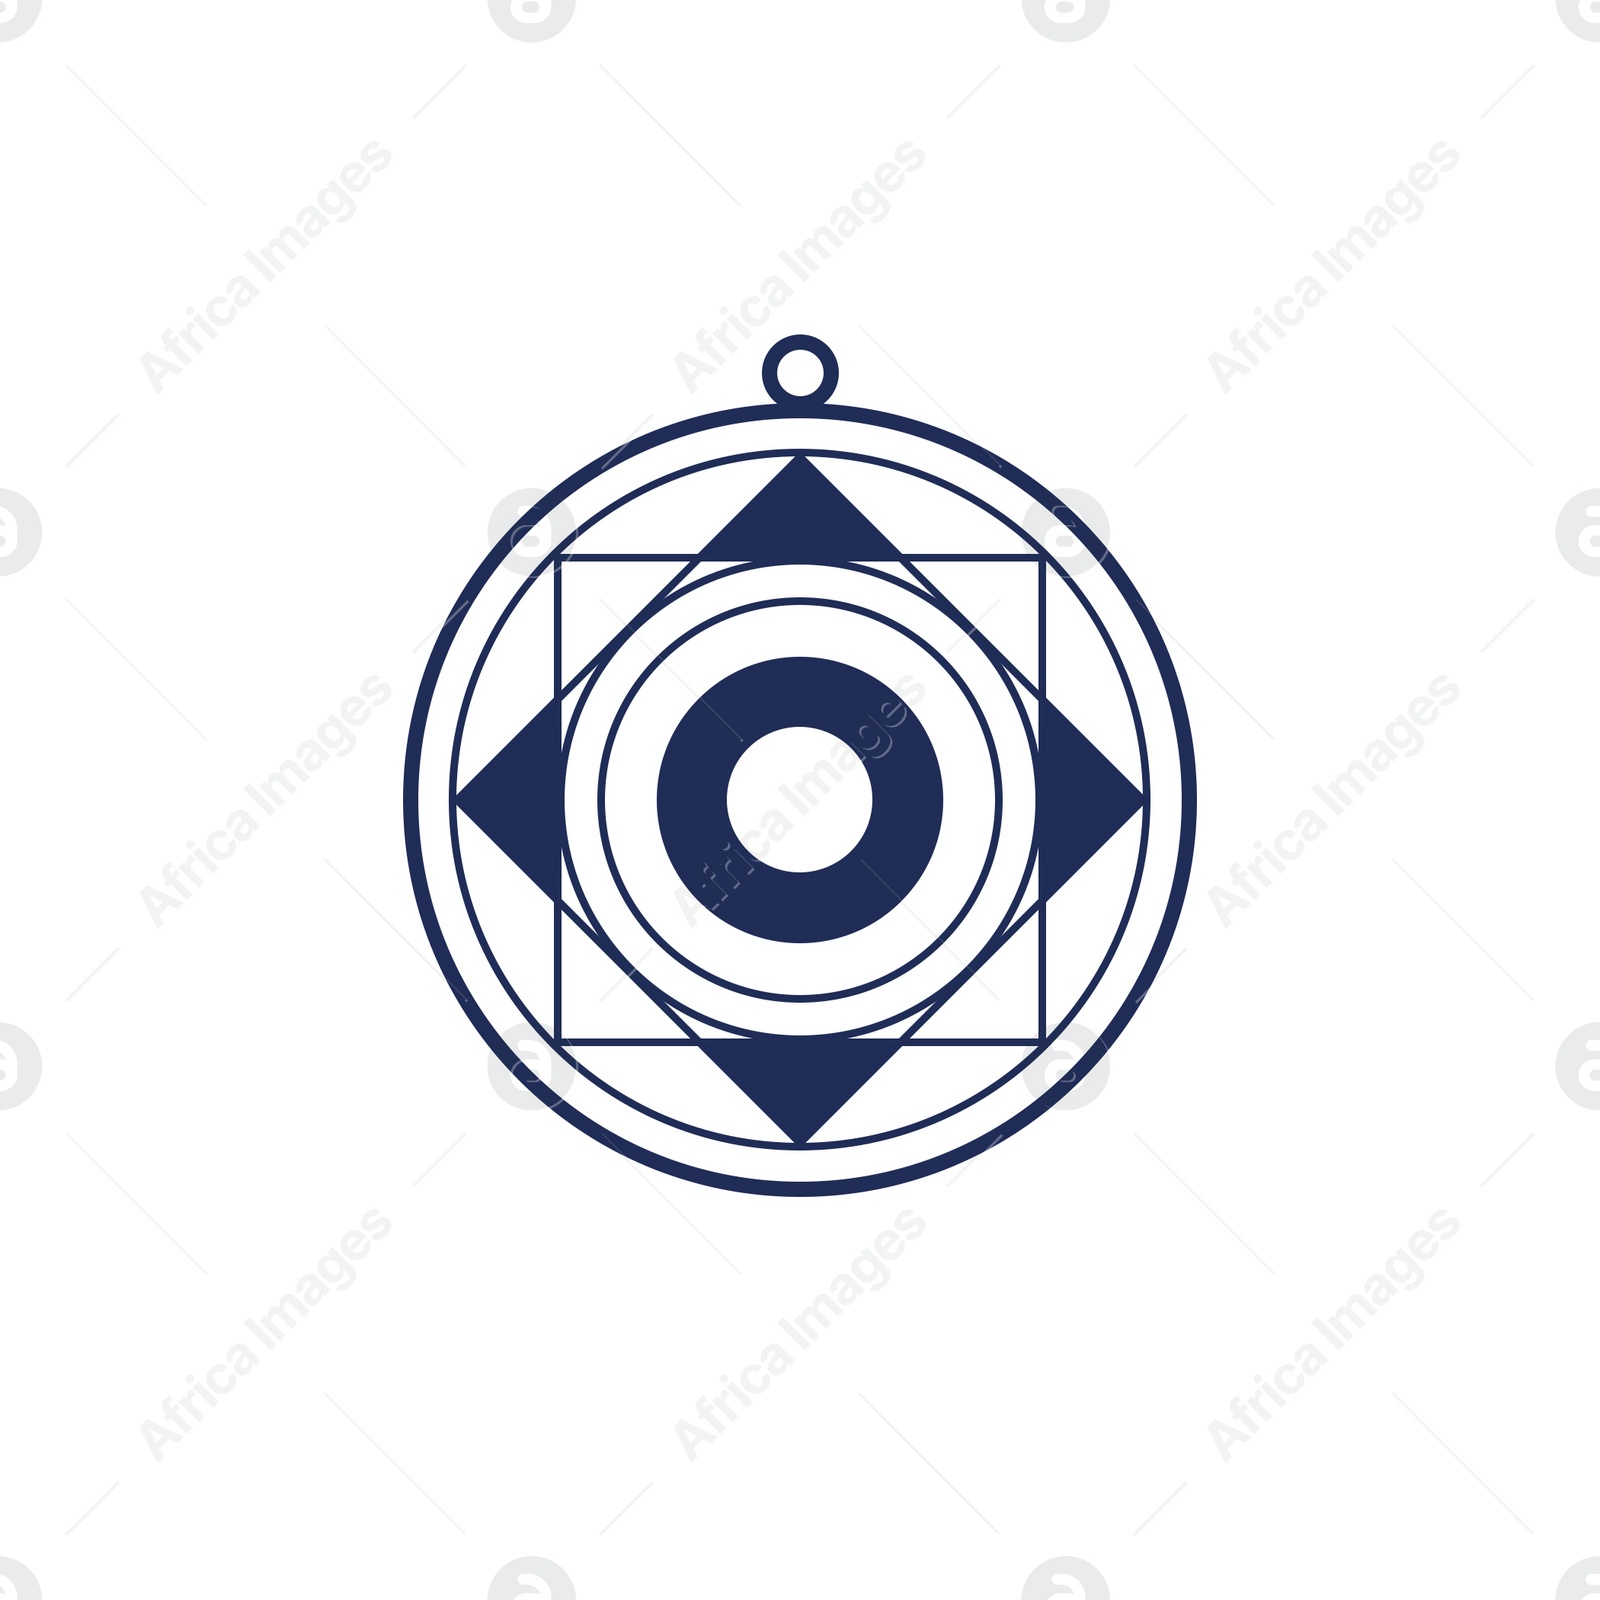 Illustration of  compass rose on white background